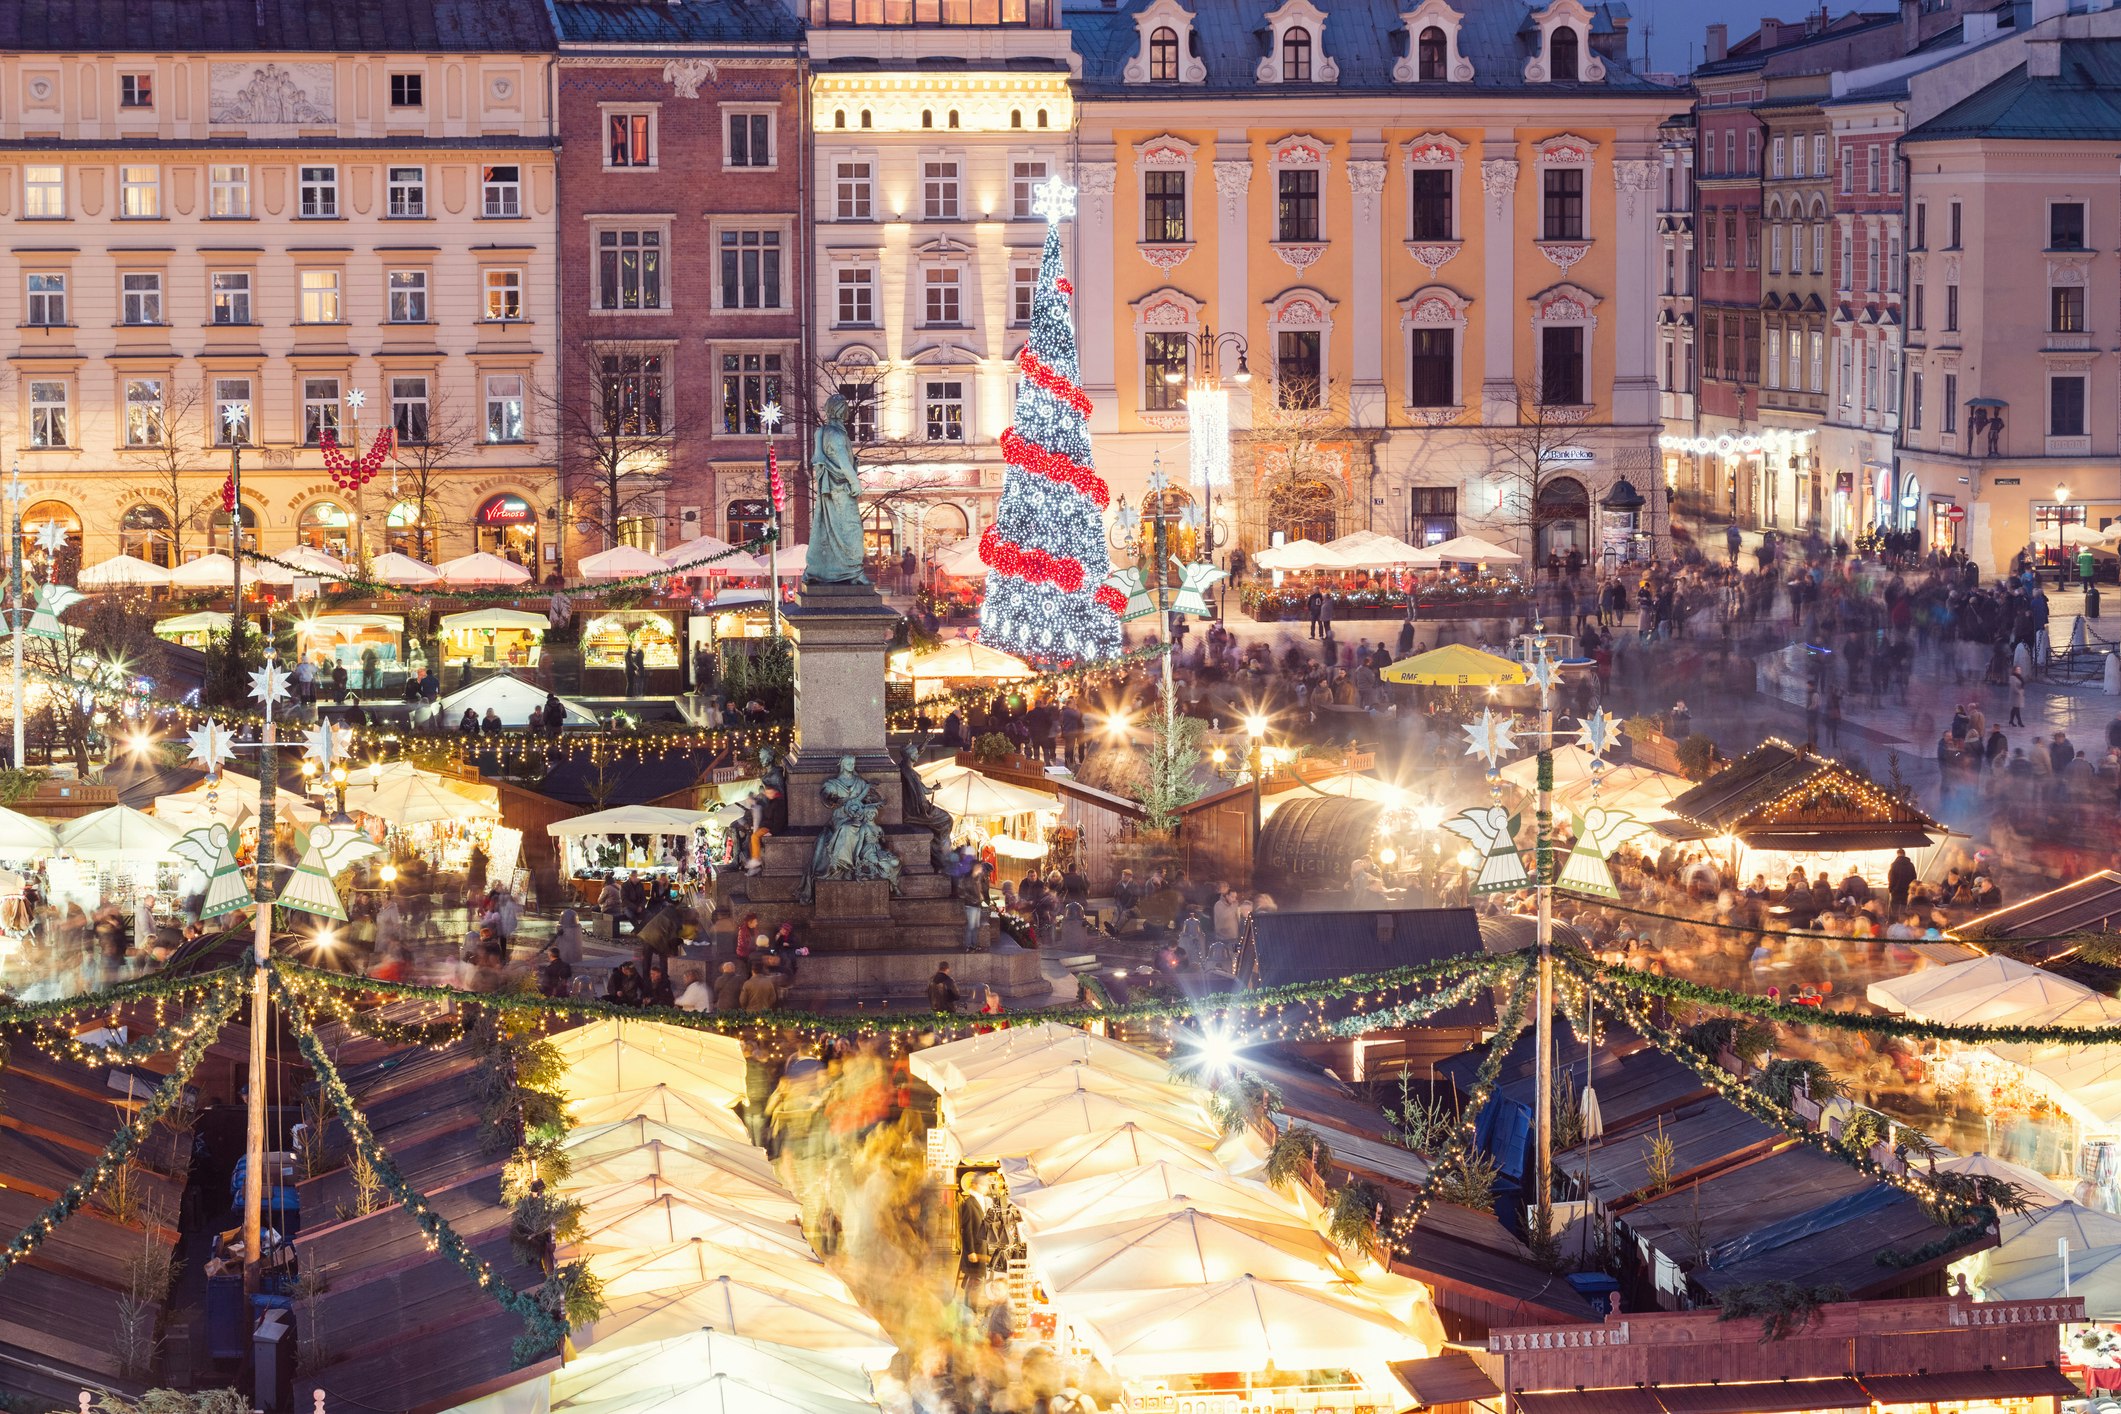 The huge Christmas market in the main square of Kraków, Malopolskie, Poland